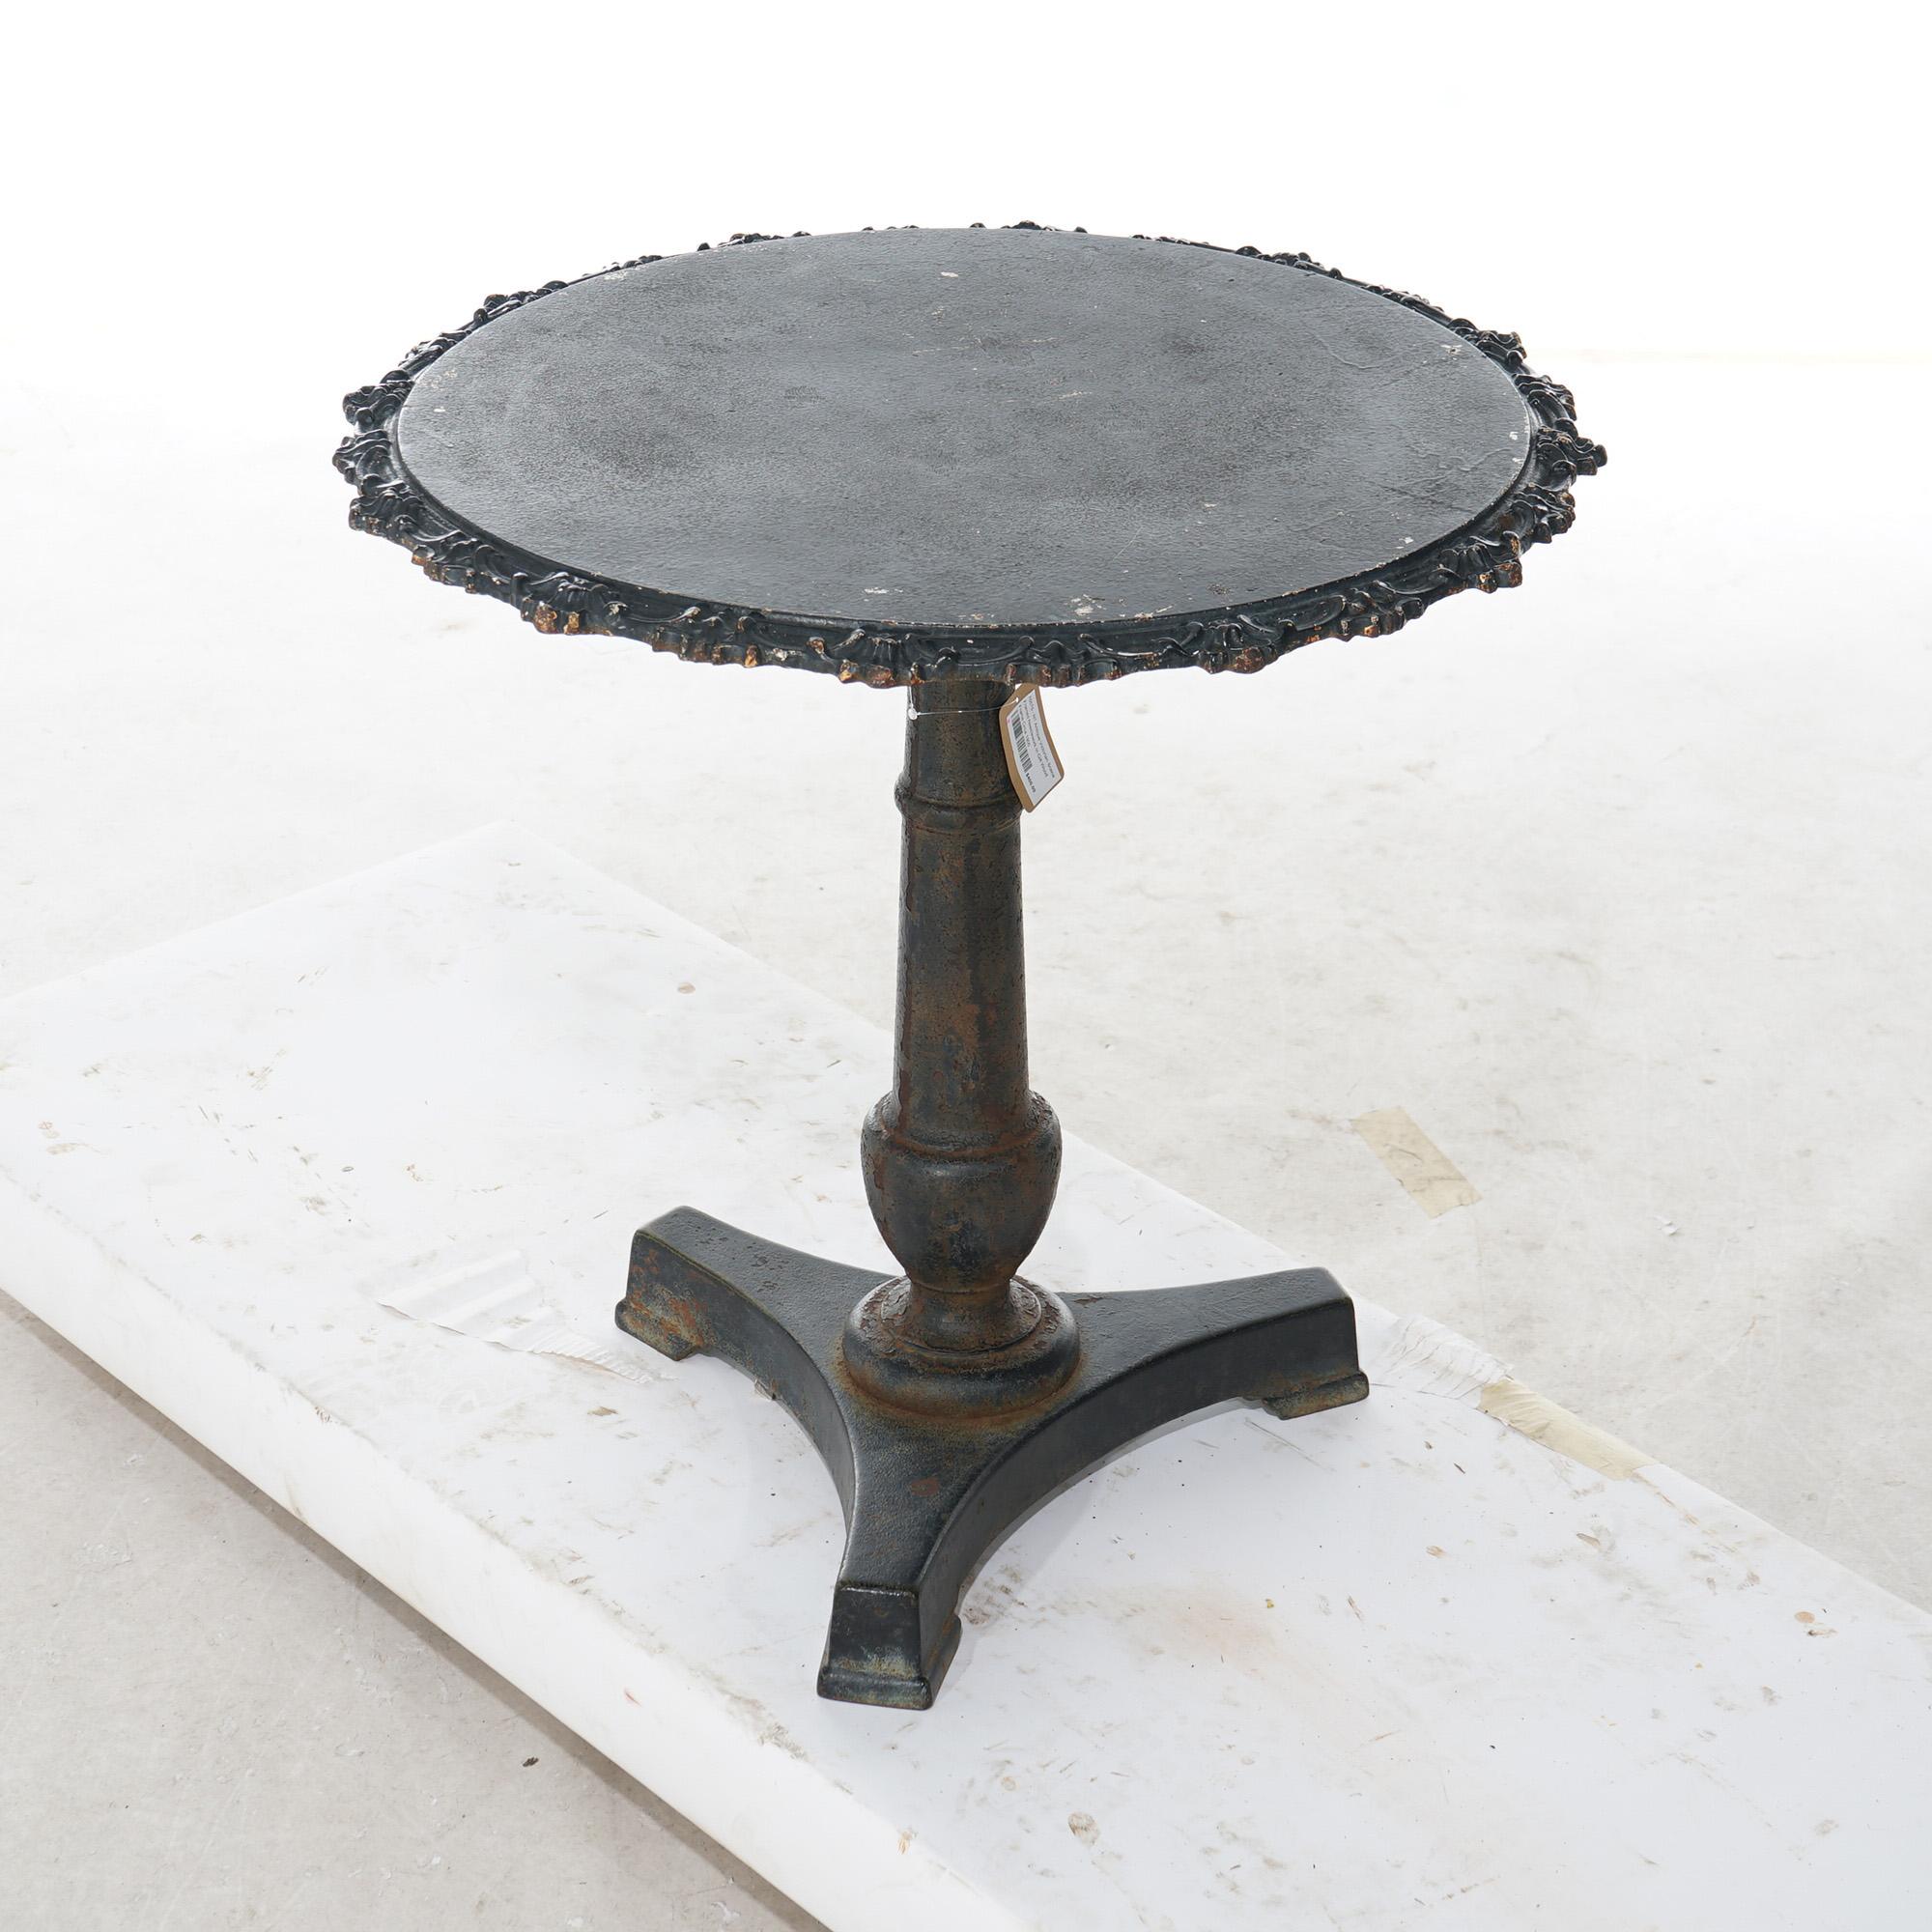 Antique Neoclassical Cast Iron Café Garden Table by Rudy Groeger Foundry 19thC For Sale 5